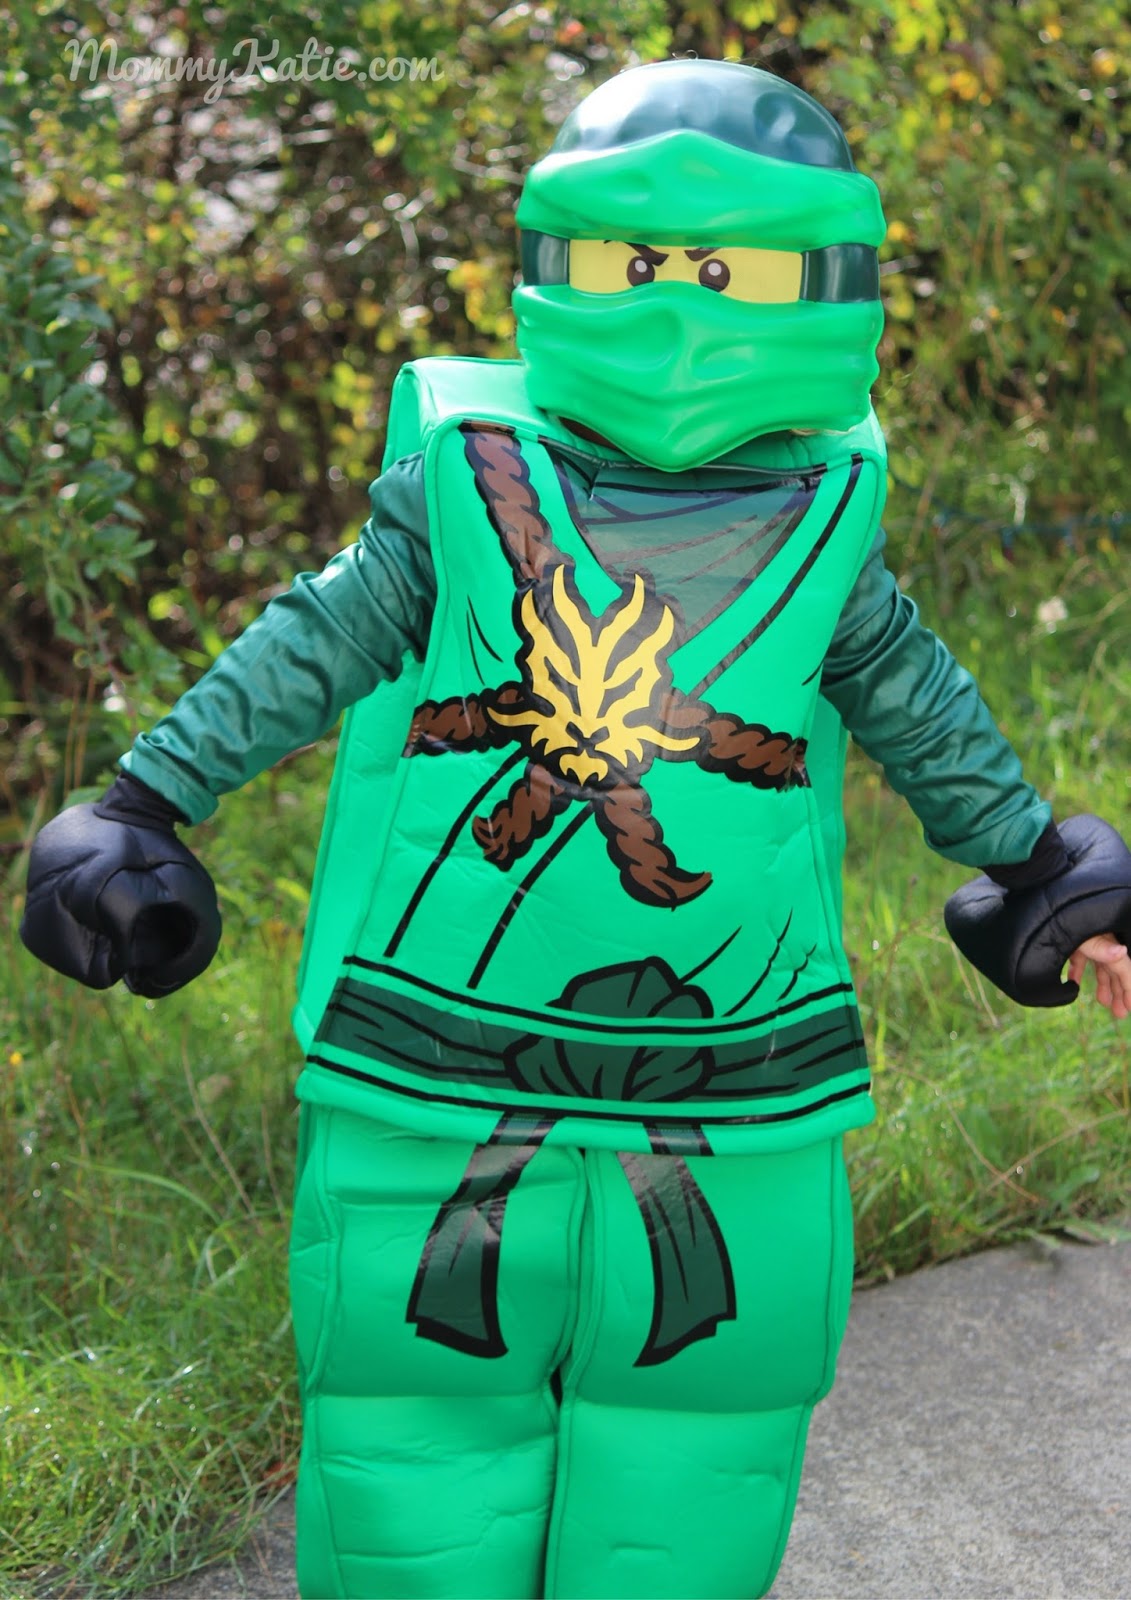 Lego Ninjago Costume From Disguise Costumes Mommy Katie - protective shark suit pass roblox